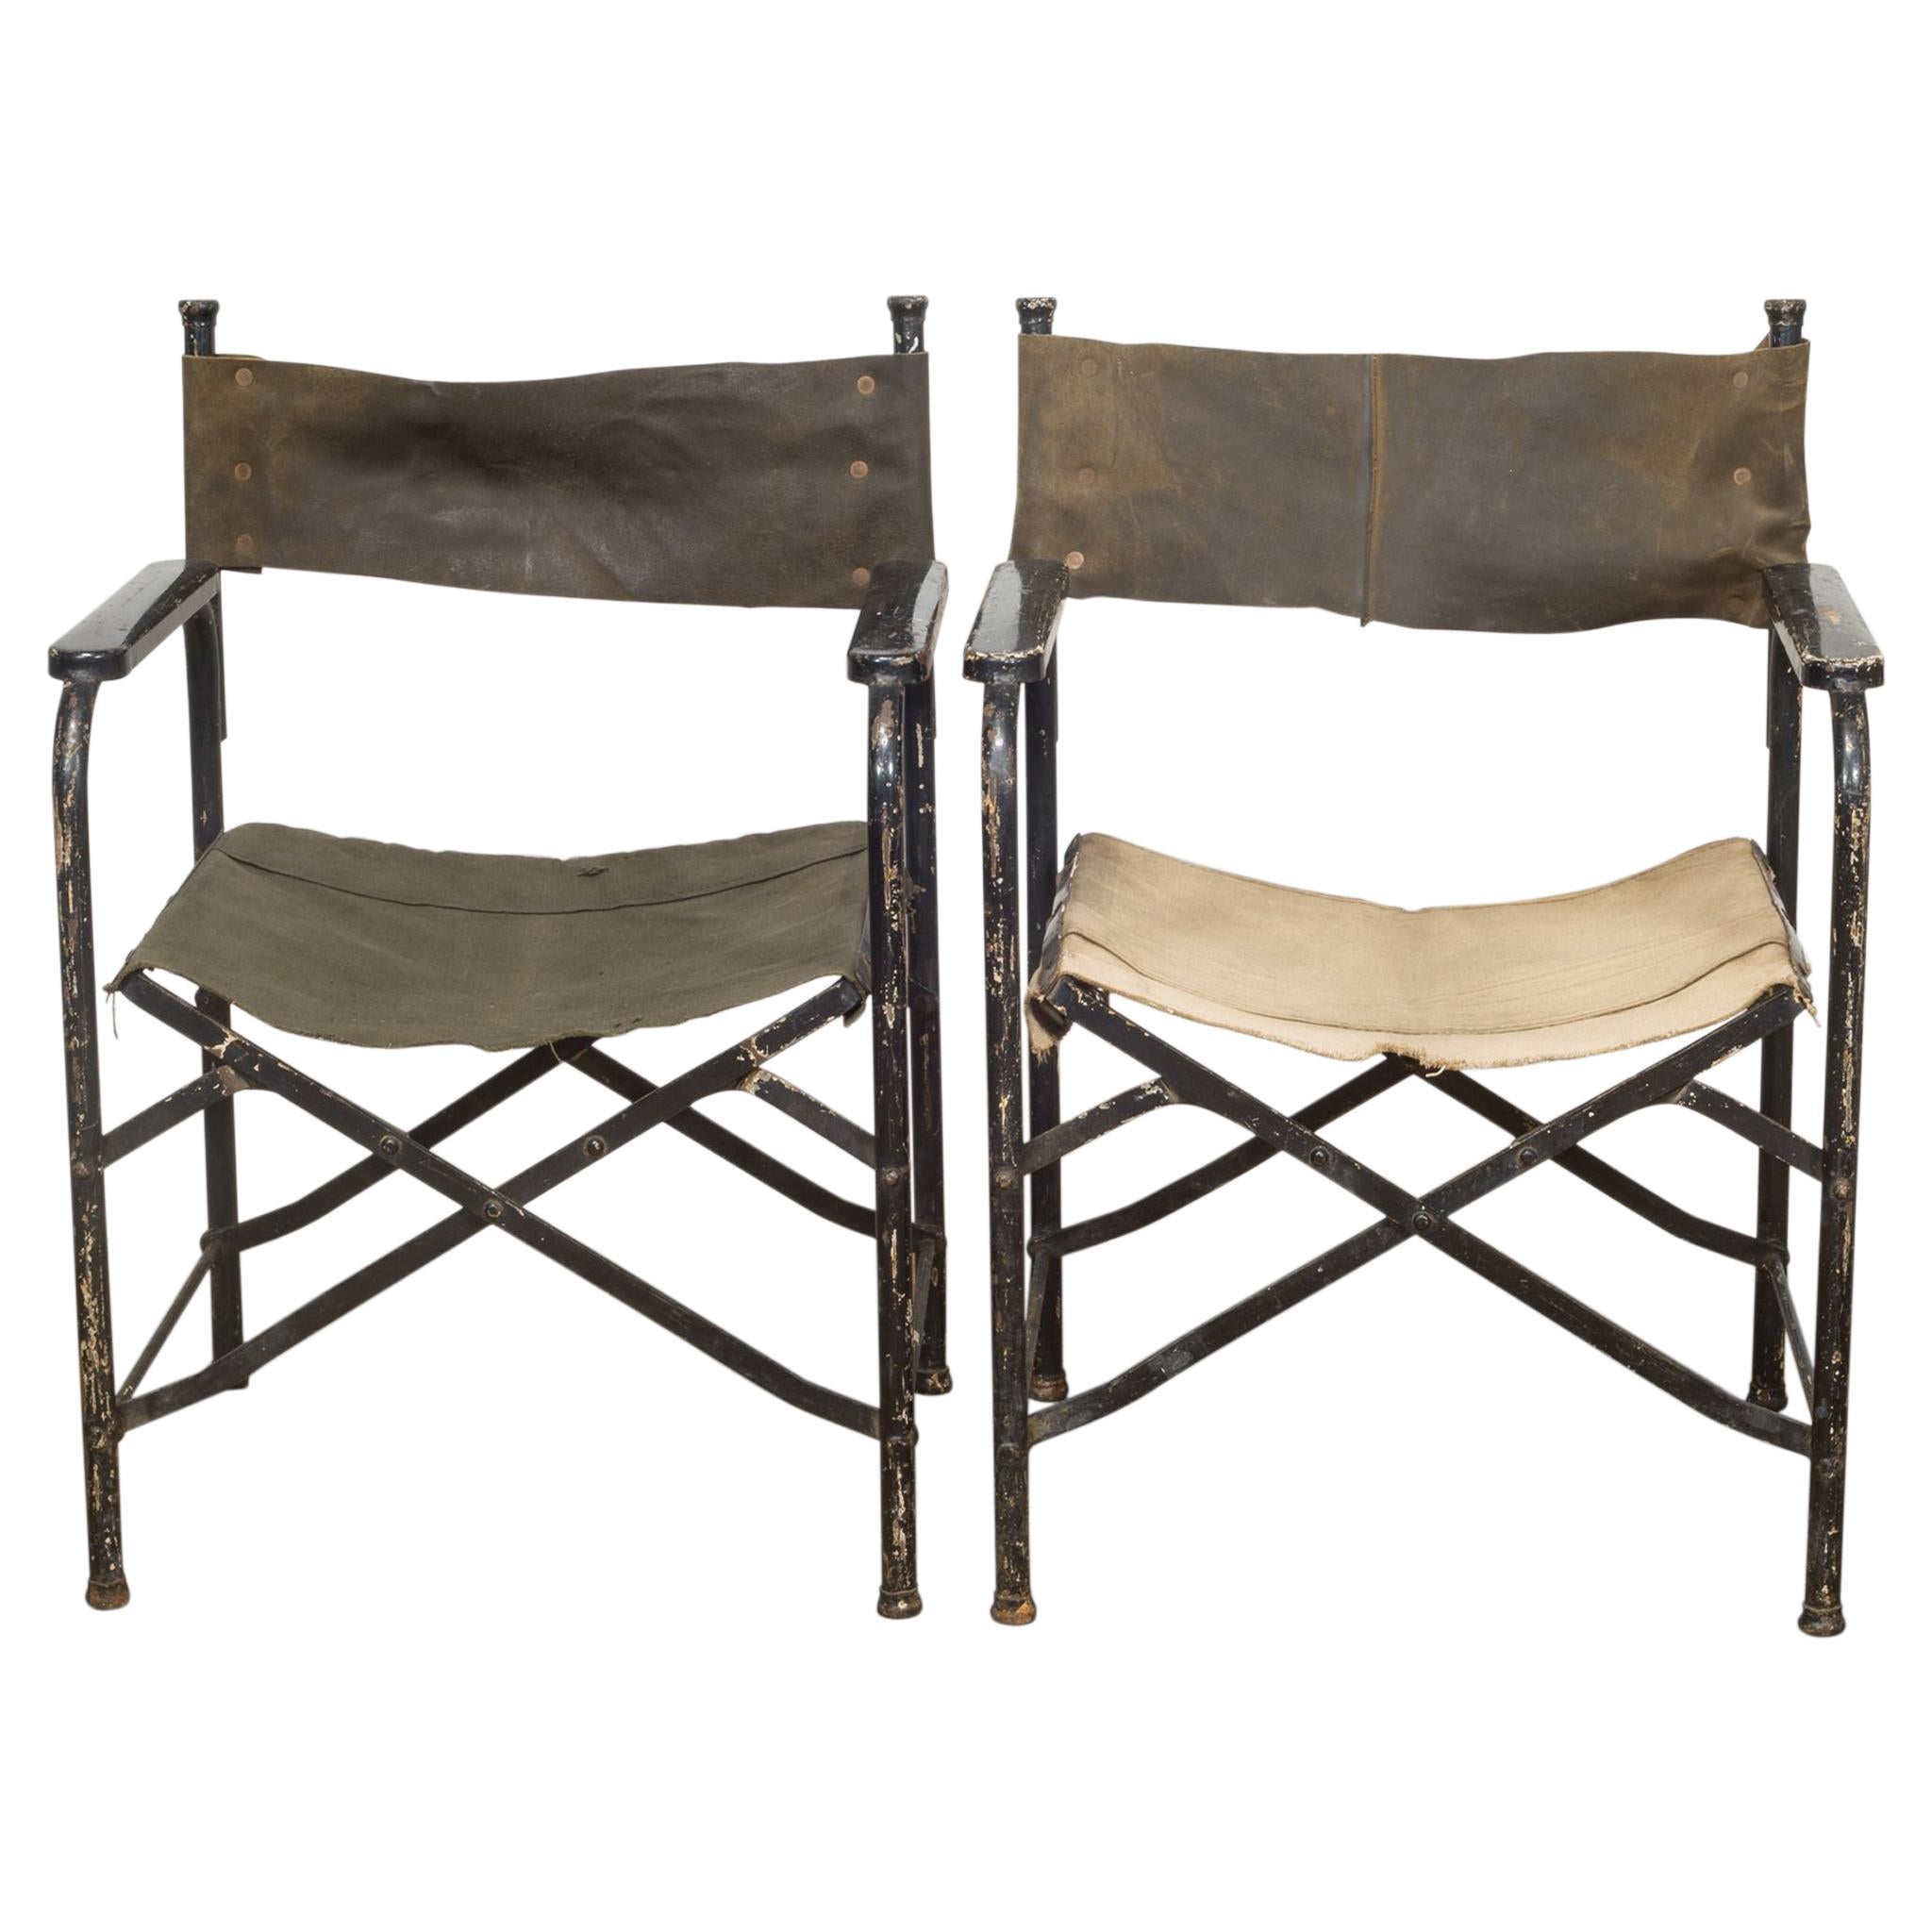 Distressed Miltary Folding Director's Chairs, circa 1940